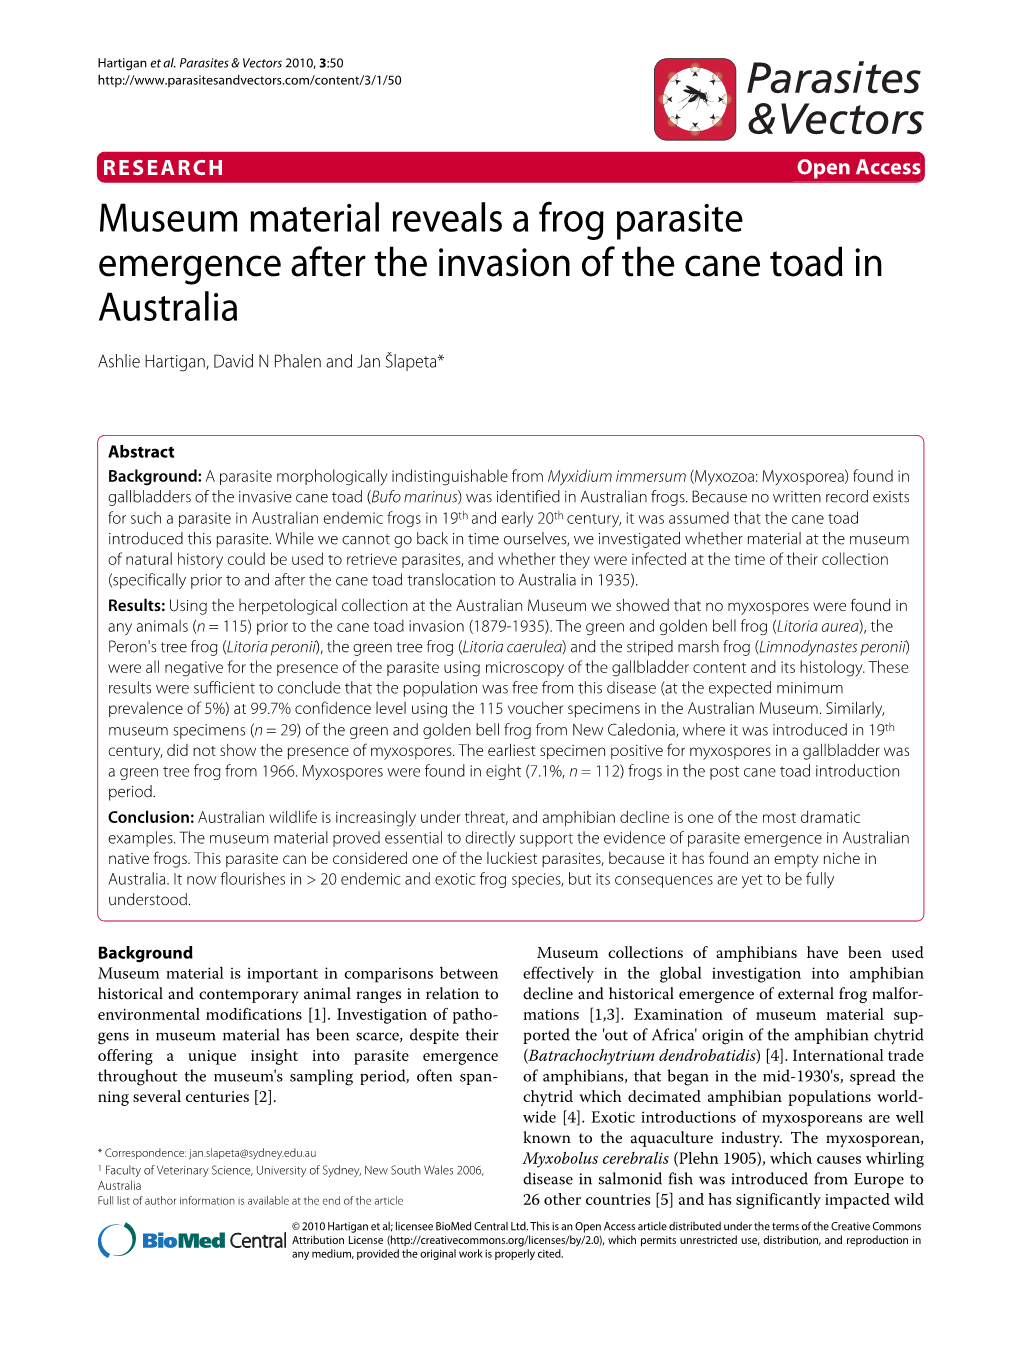 Museum Material Reveals a Frog Parasite Emergence After the Invasion of the Cane Toad in Australia Parasites & Vectors 2010, 3:50